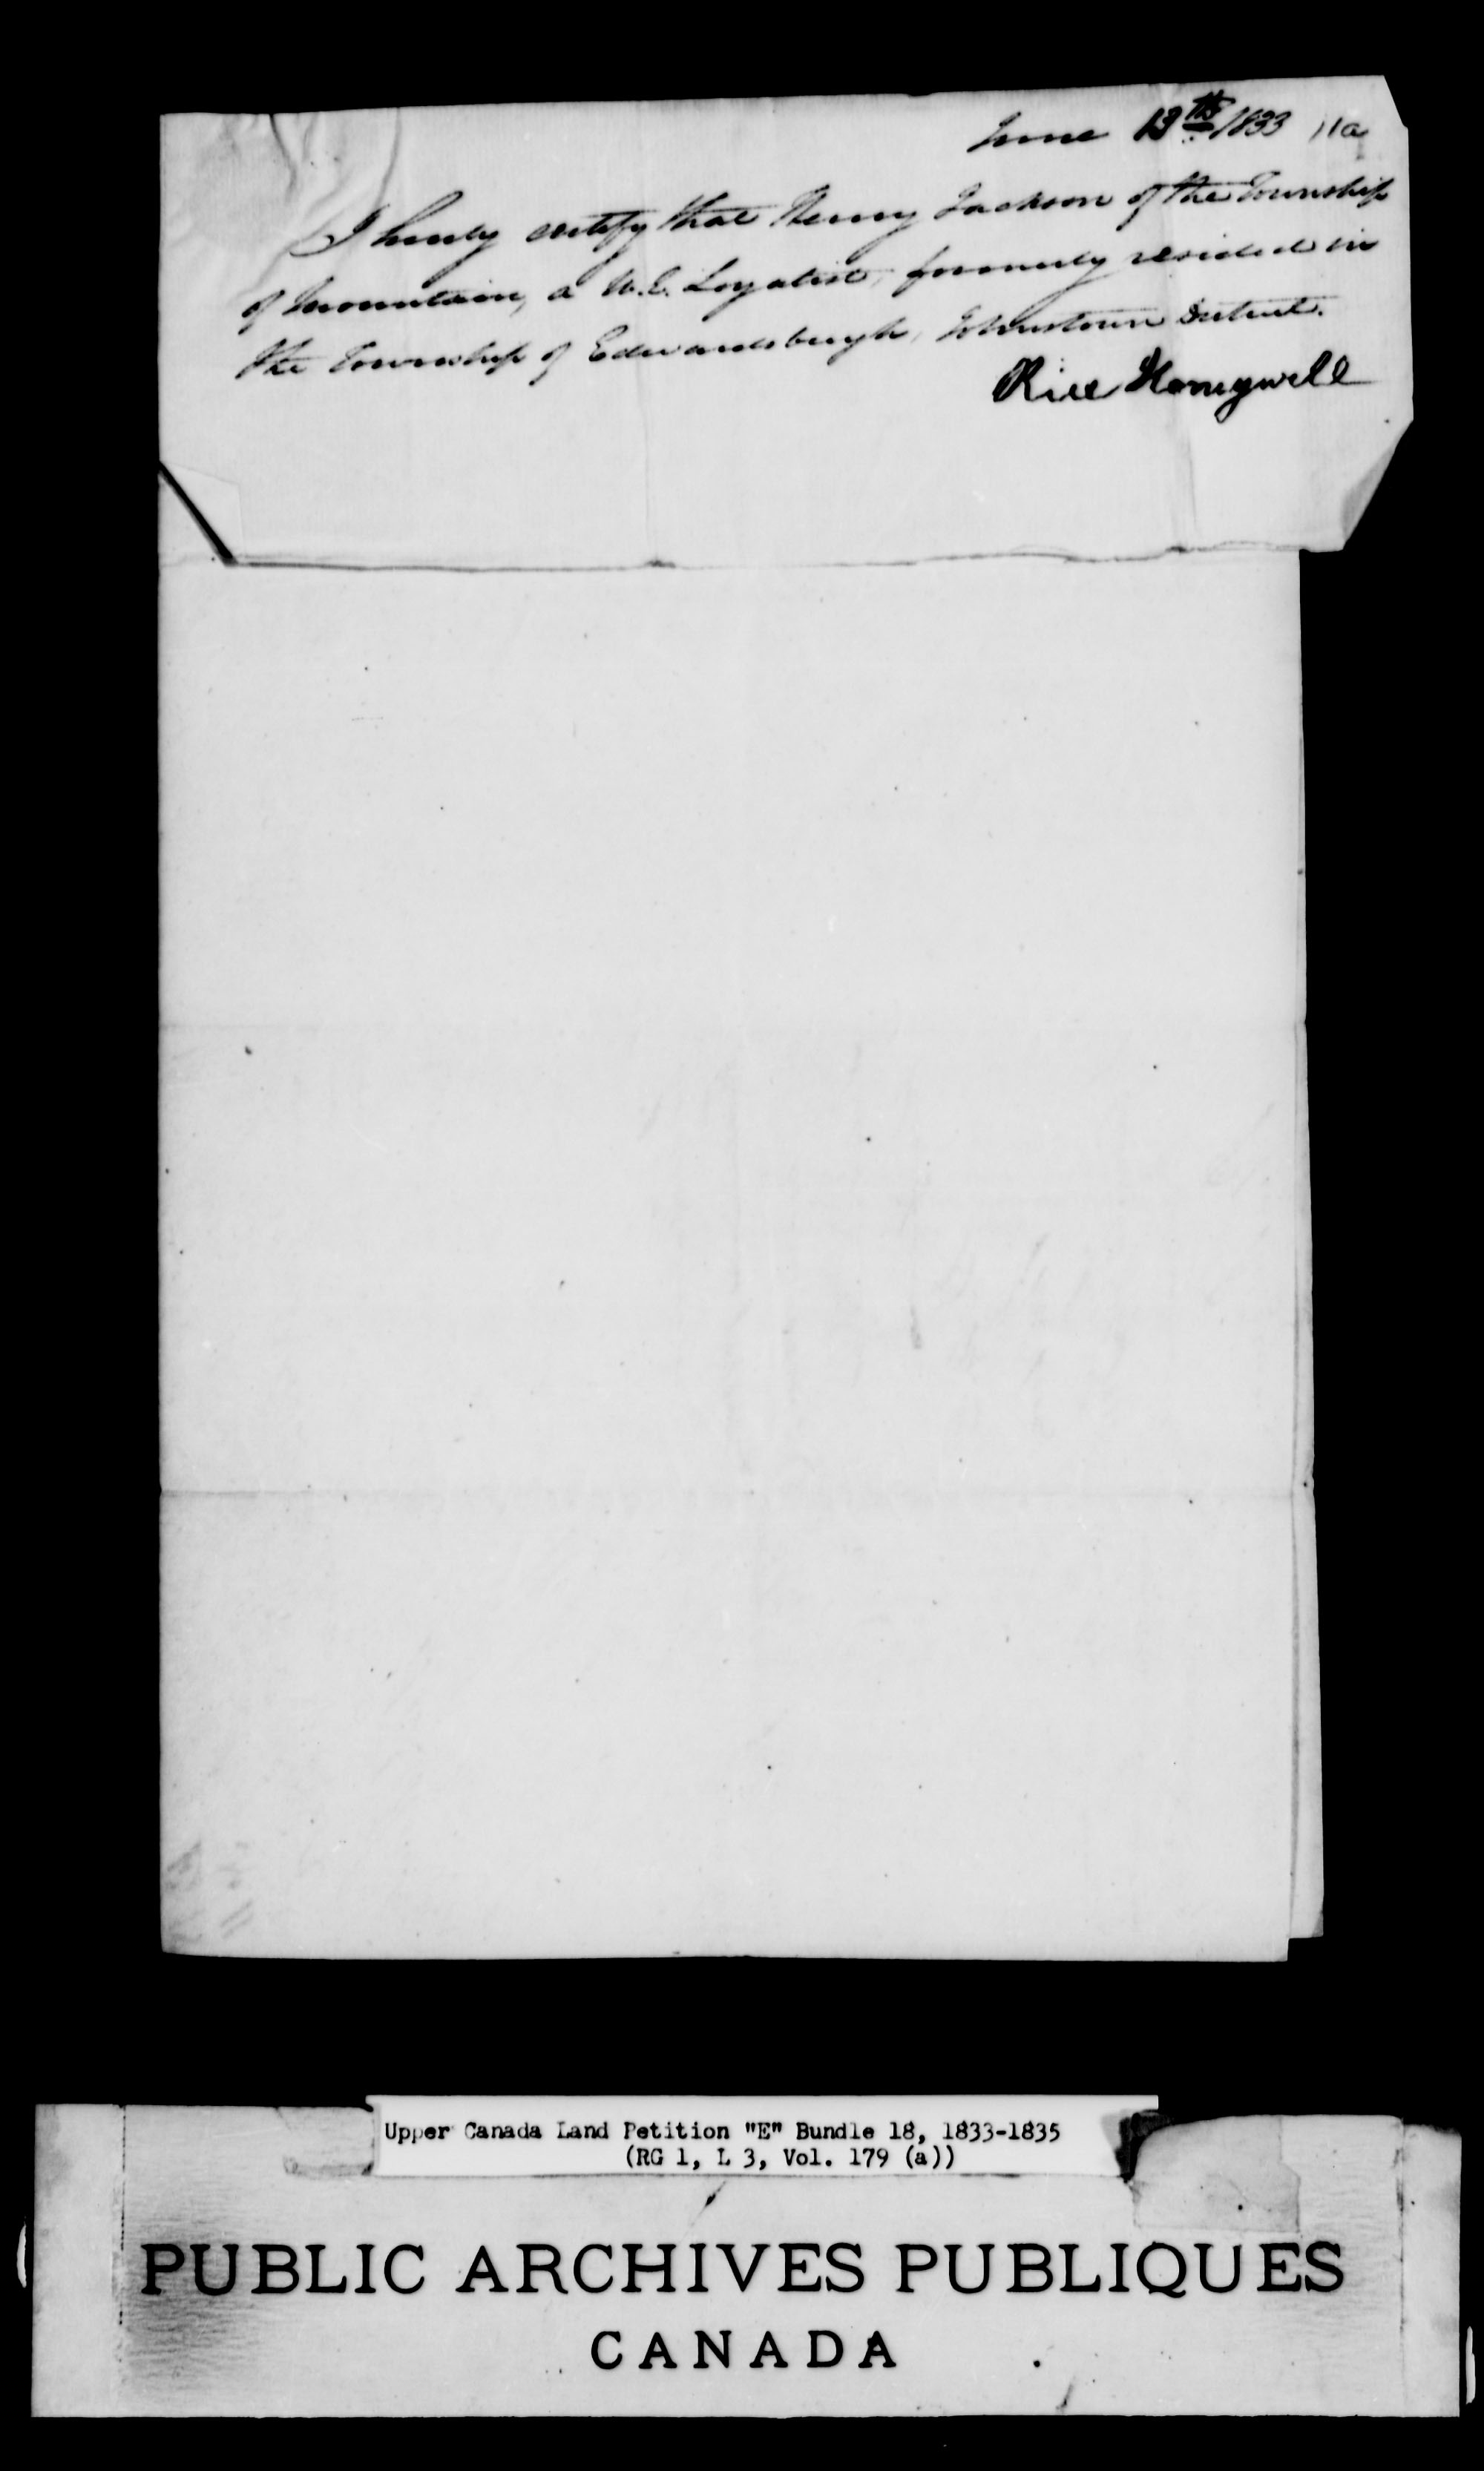 Title: Upper Canada Land Petitions (1763-1865) - Mikan Number: 205131 - Microform: c-1889